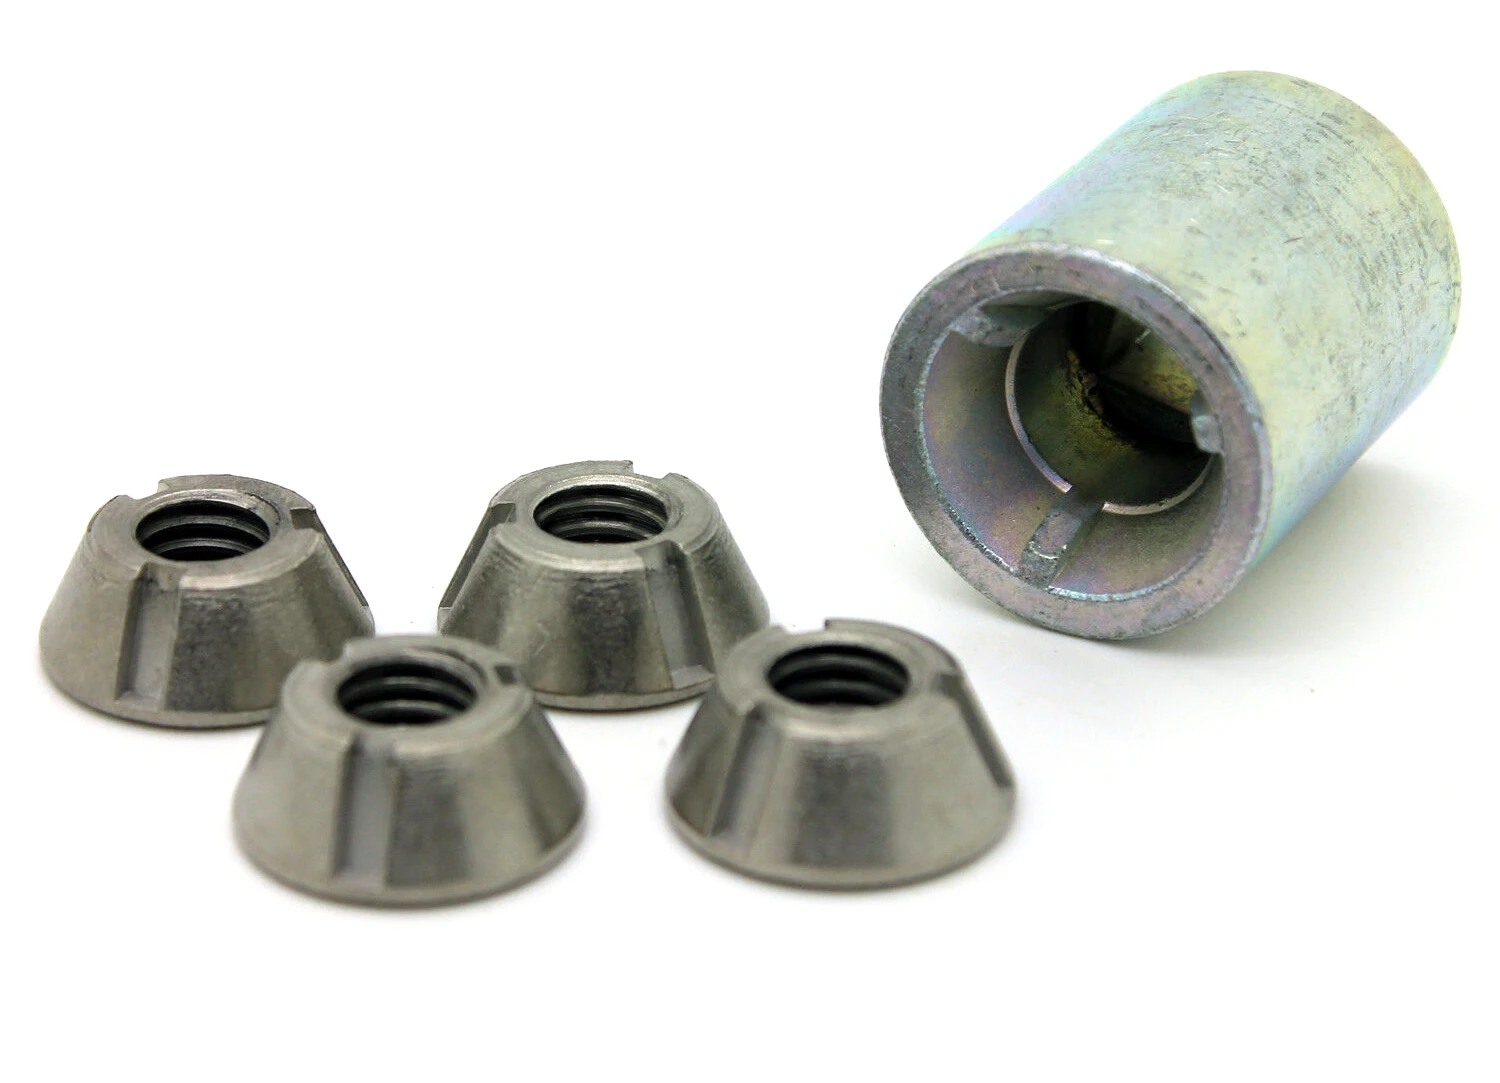 316 Stainless Steel Tri-groove Tamper Proof Security Nuts - Buy Security  Nuts,Tri-groove Nuts,Tri Lock Nut Product on Alibaba.com